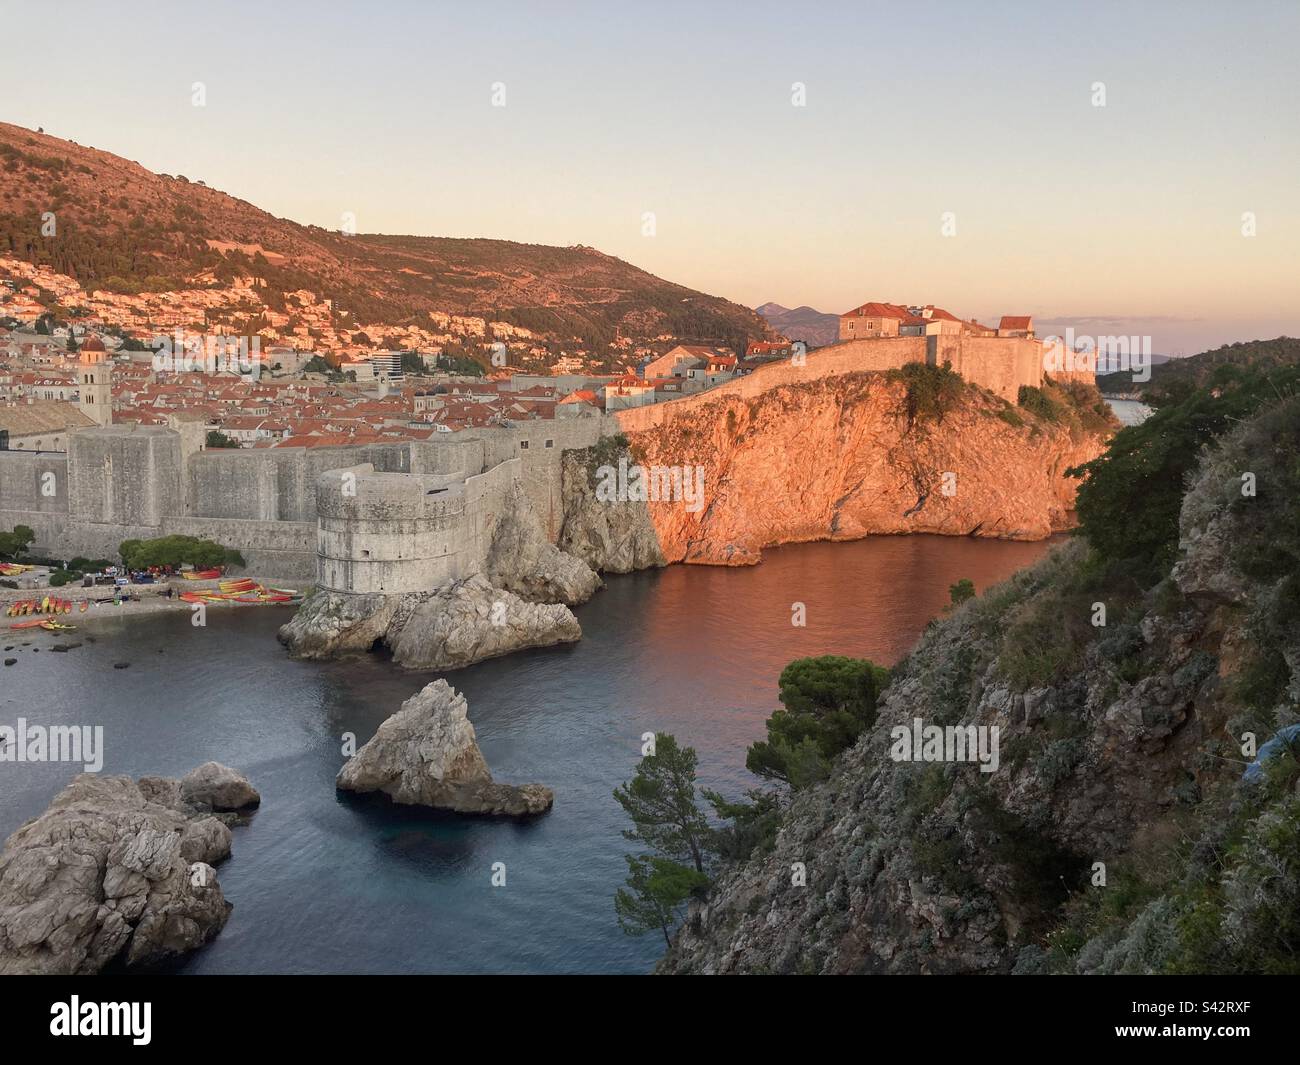 Dubrovnik old walls at sunset Stock Photo